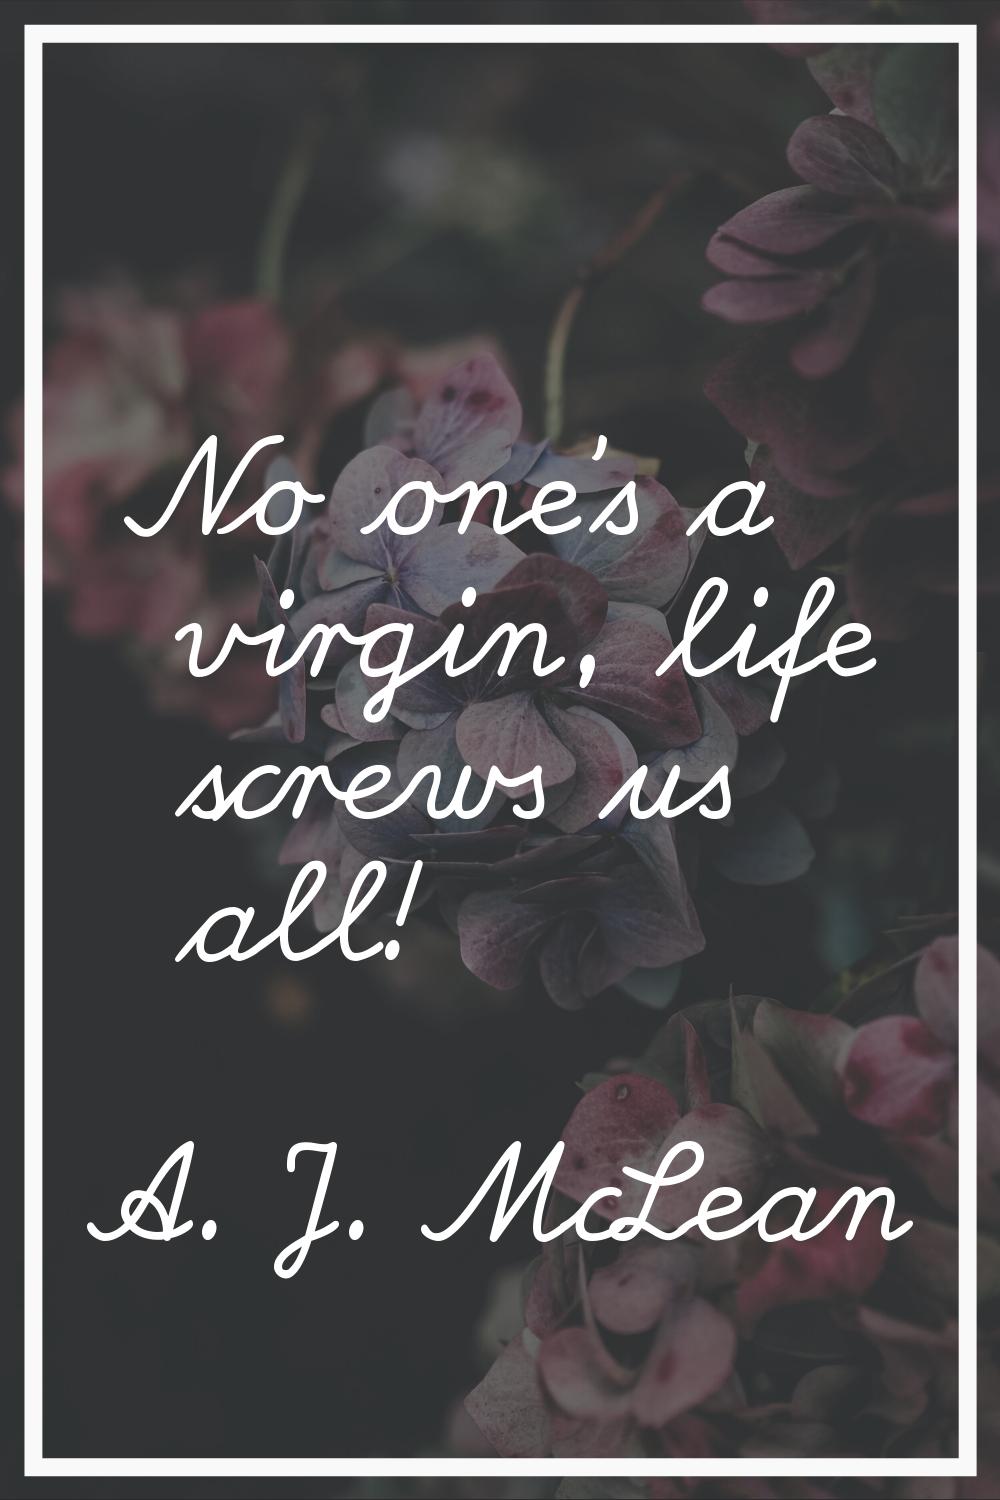 No one's a virgin, life screws us all!